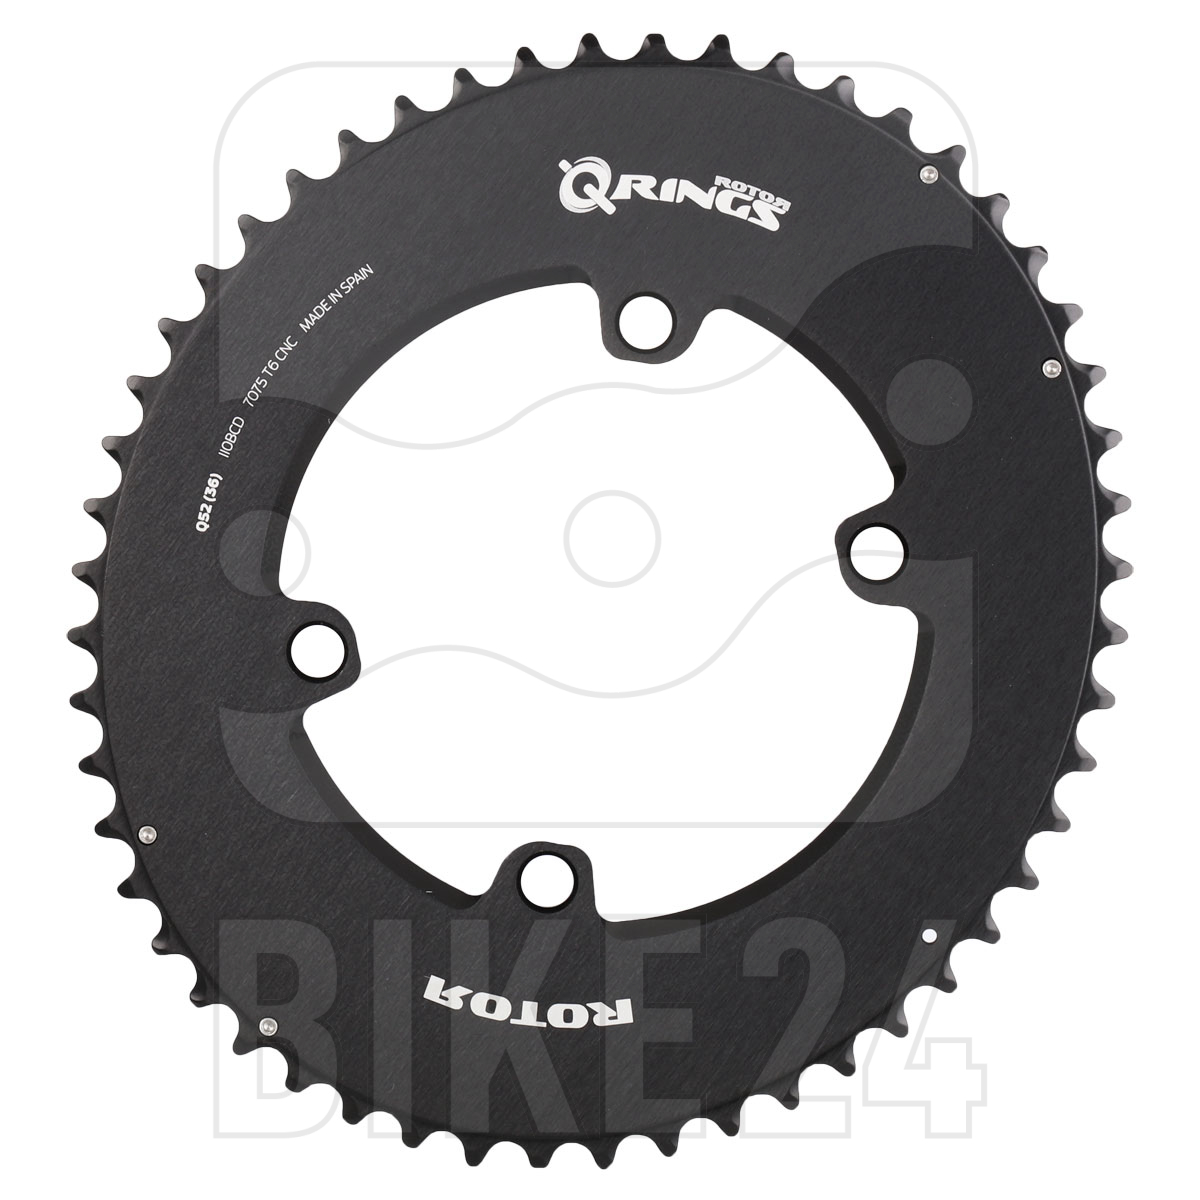 Productfoto van Rotor Q-Ring Outer Road Aero Chainring oval - BCD 110x4 - medium